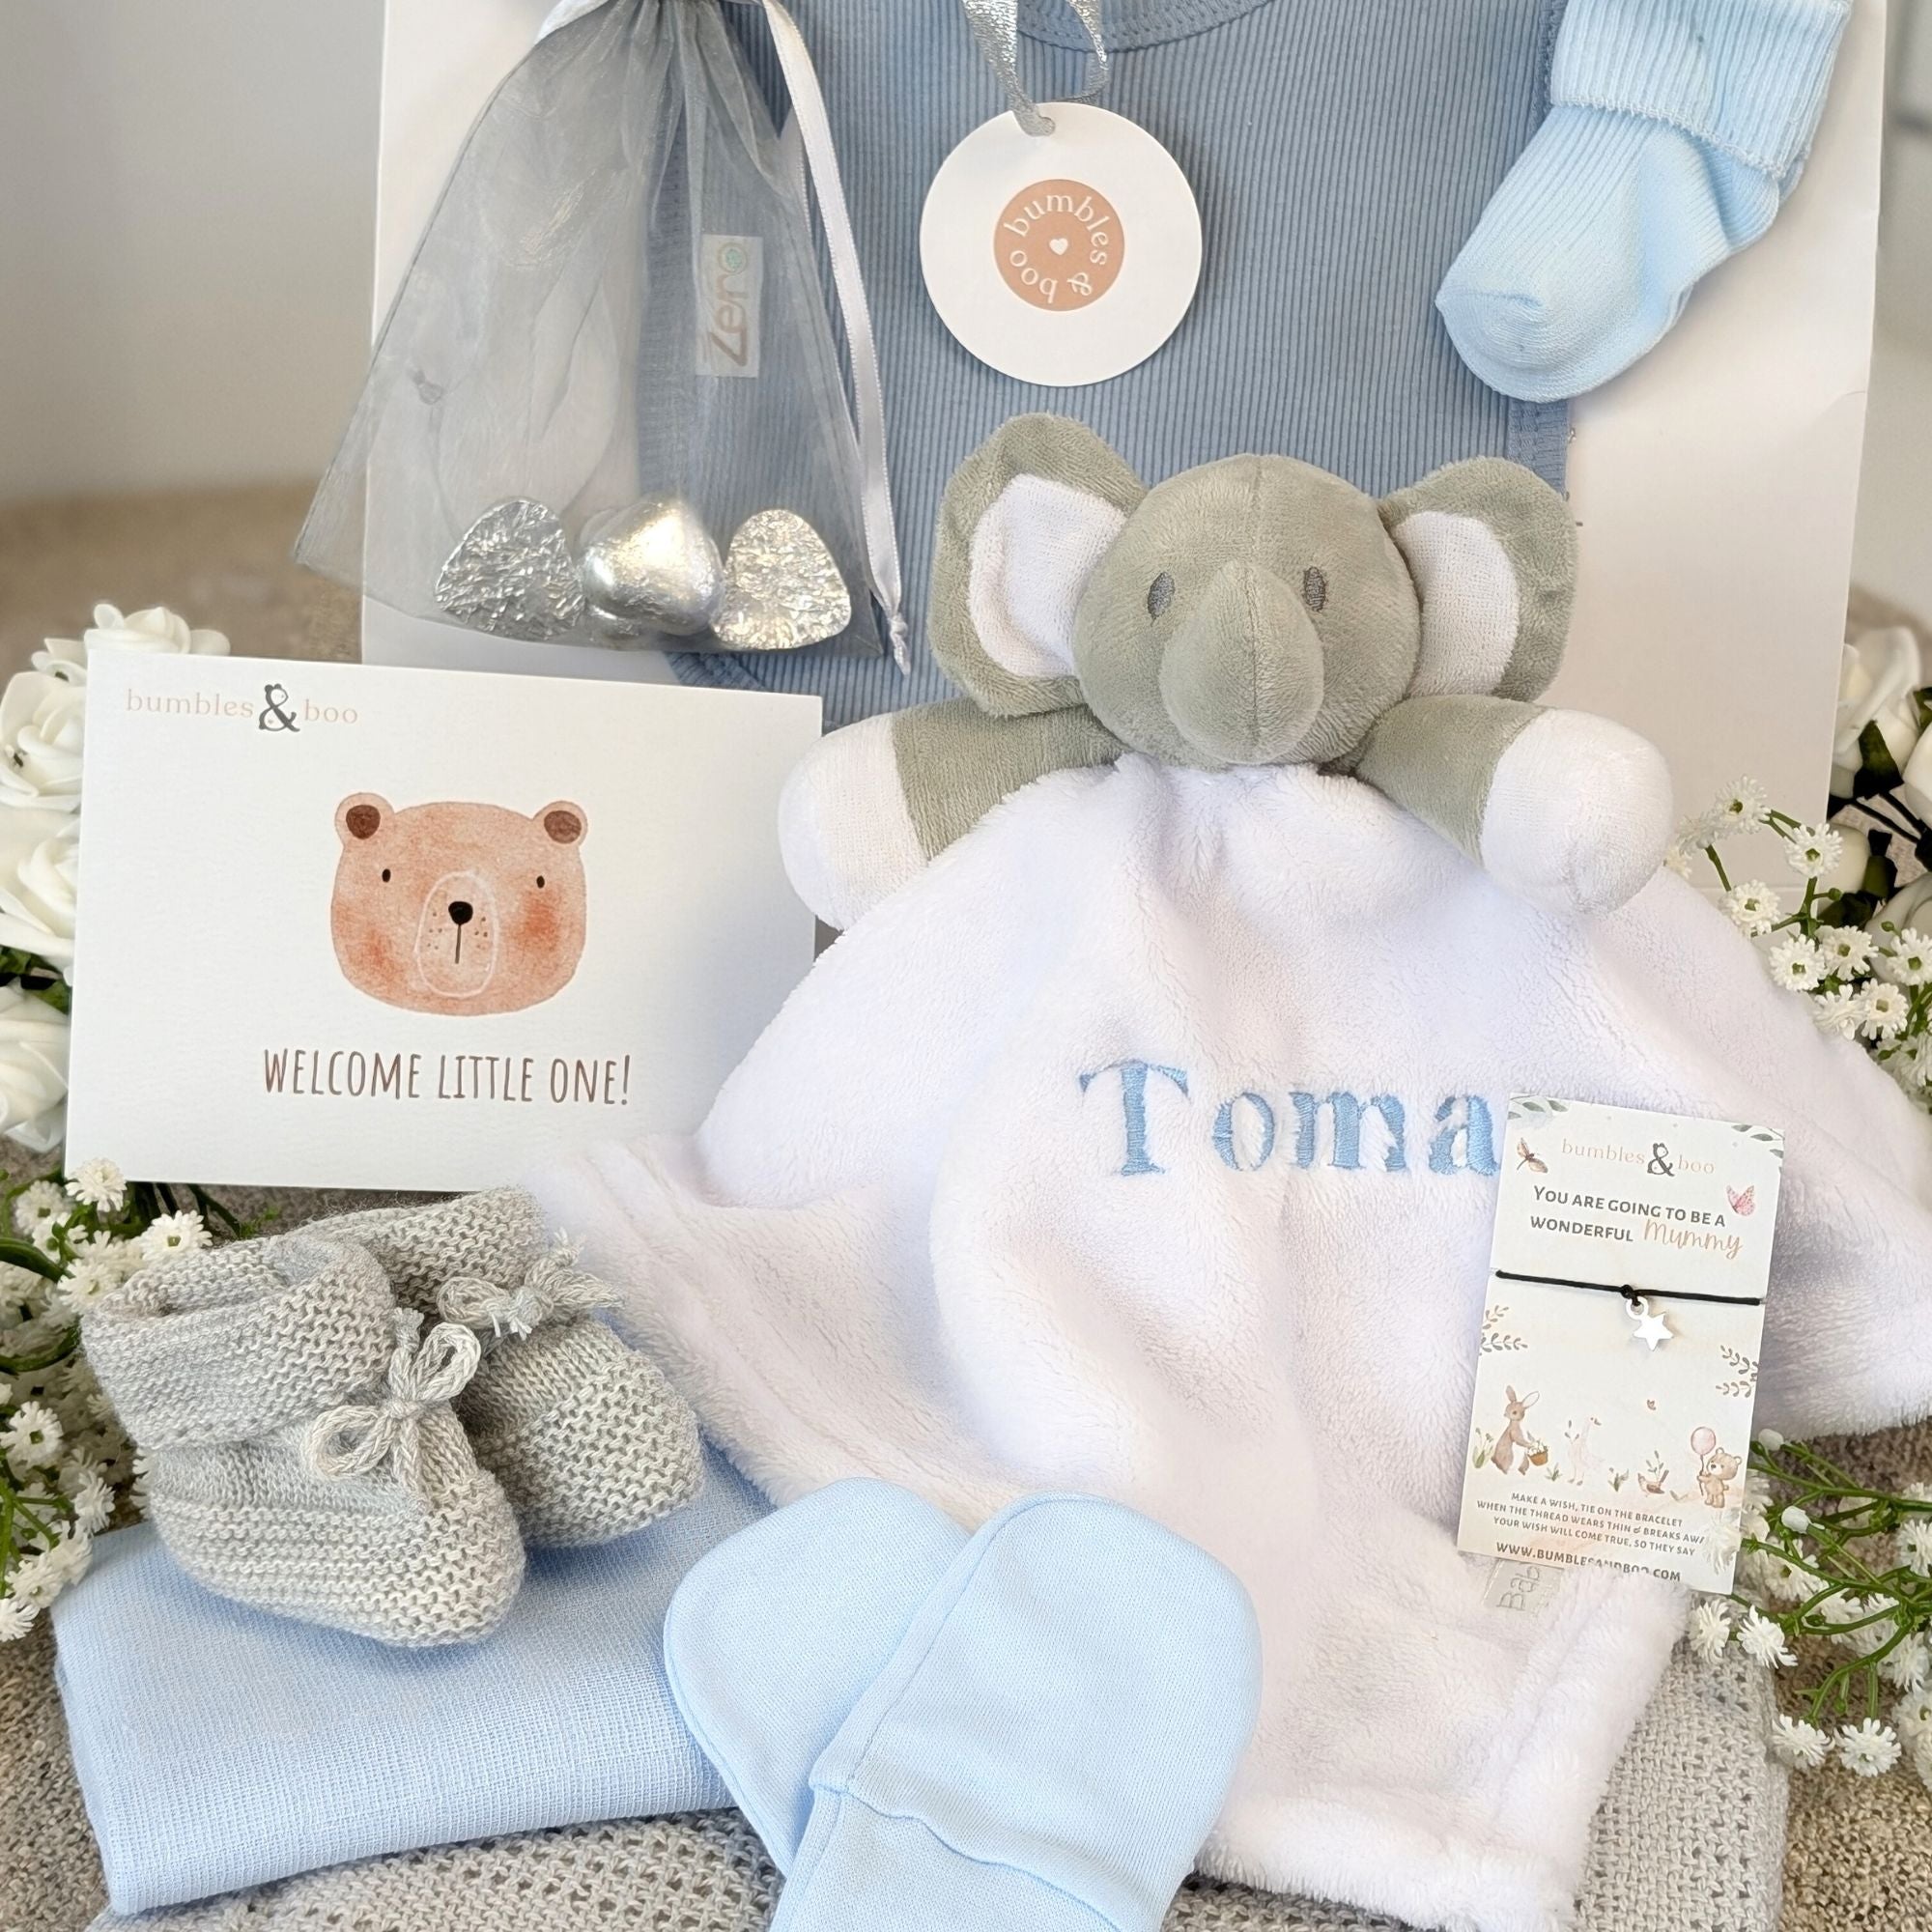 baby boy gifts hamper with bib, socks, soft toy elephant, blanket, muslin, mittens, booties and gifts for a new mum.